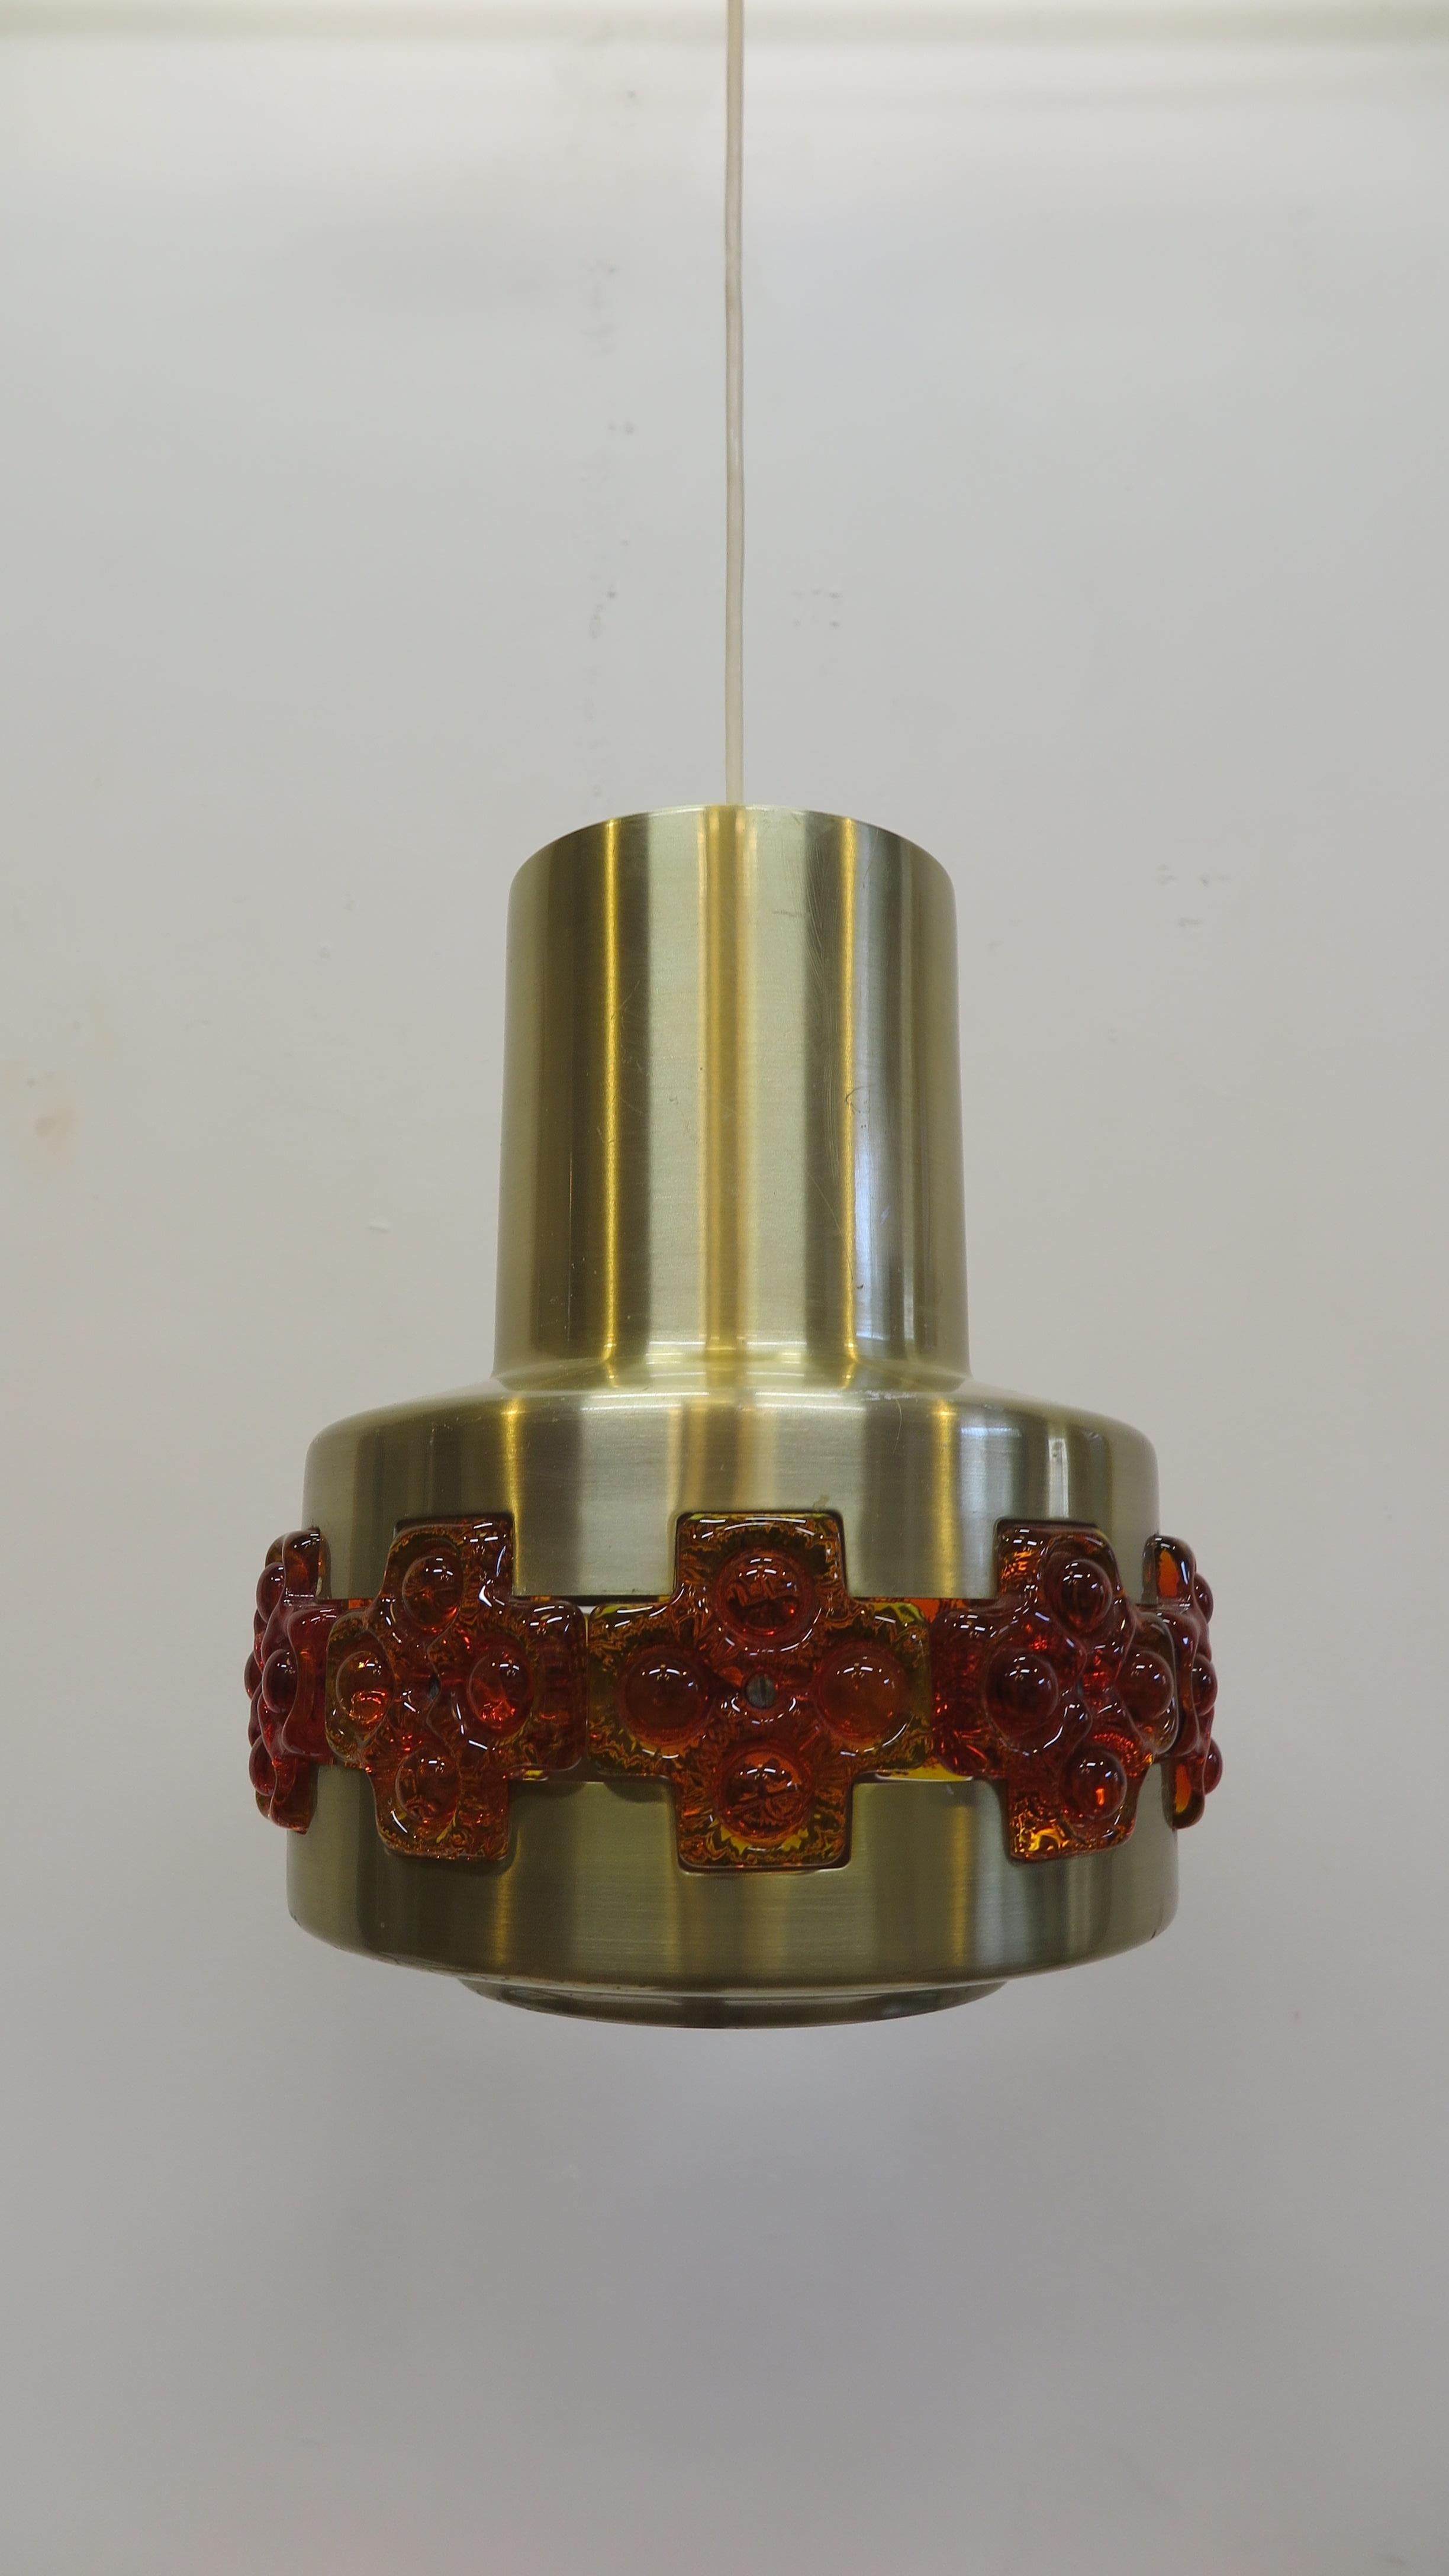 Midcentury pendant lamp by Claus Bolby. Aluminum brass finish with transparent acrylic molded art inlay detail. Beautiful art lamp having glowing of the acrylic when illuminated.
With the current cord height or hanging length is adjustable from 20